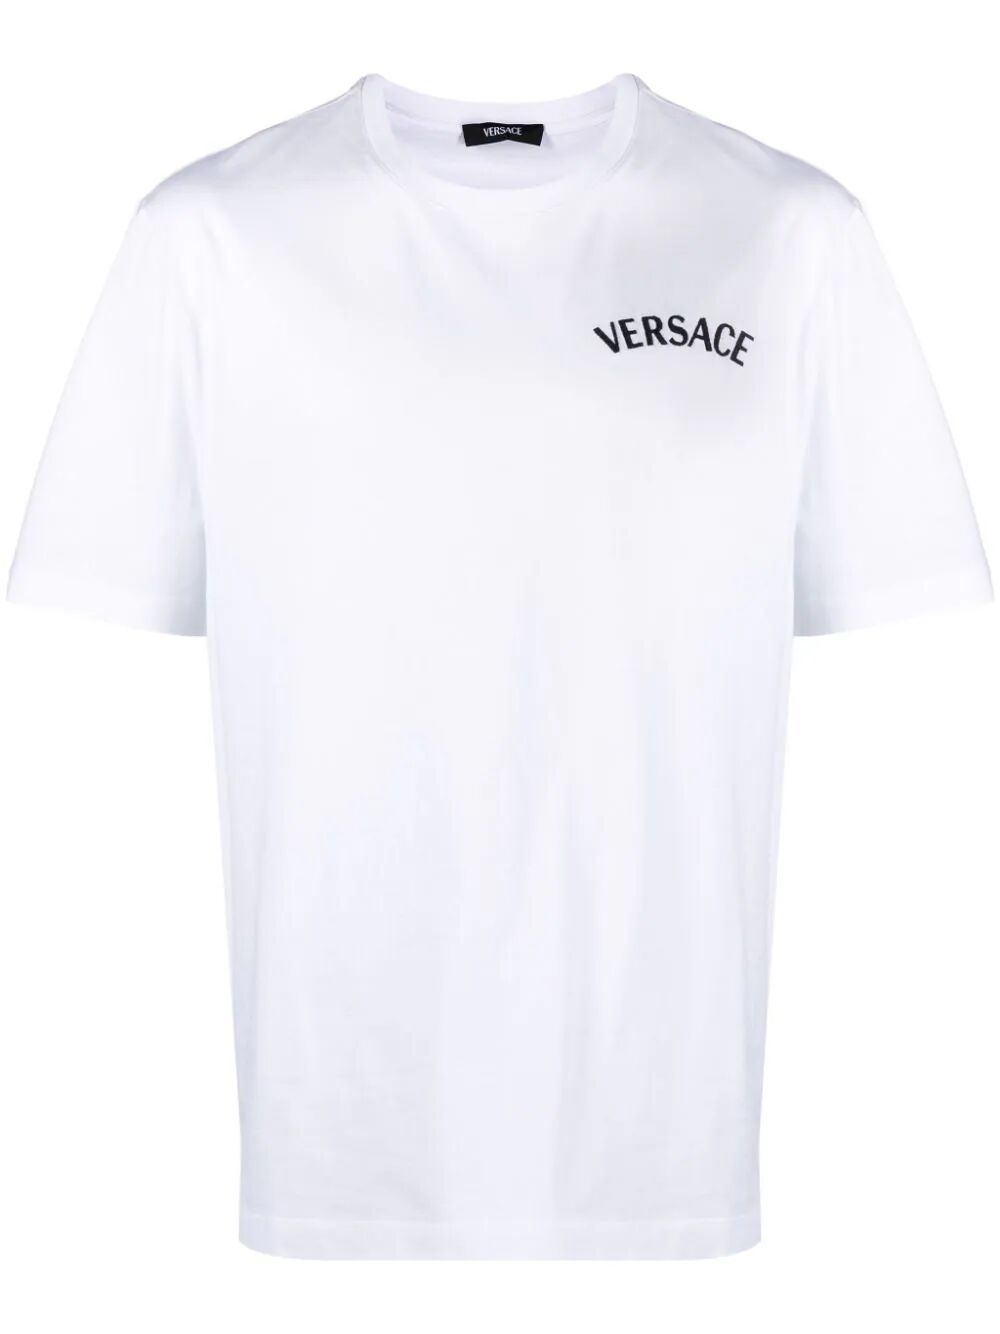 T-shirt Jersey Fabric Versace Embroidery Versace Milano Stamp Print